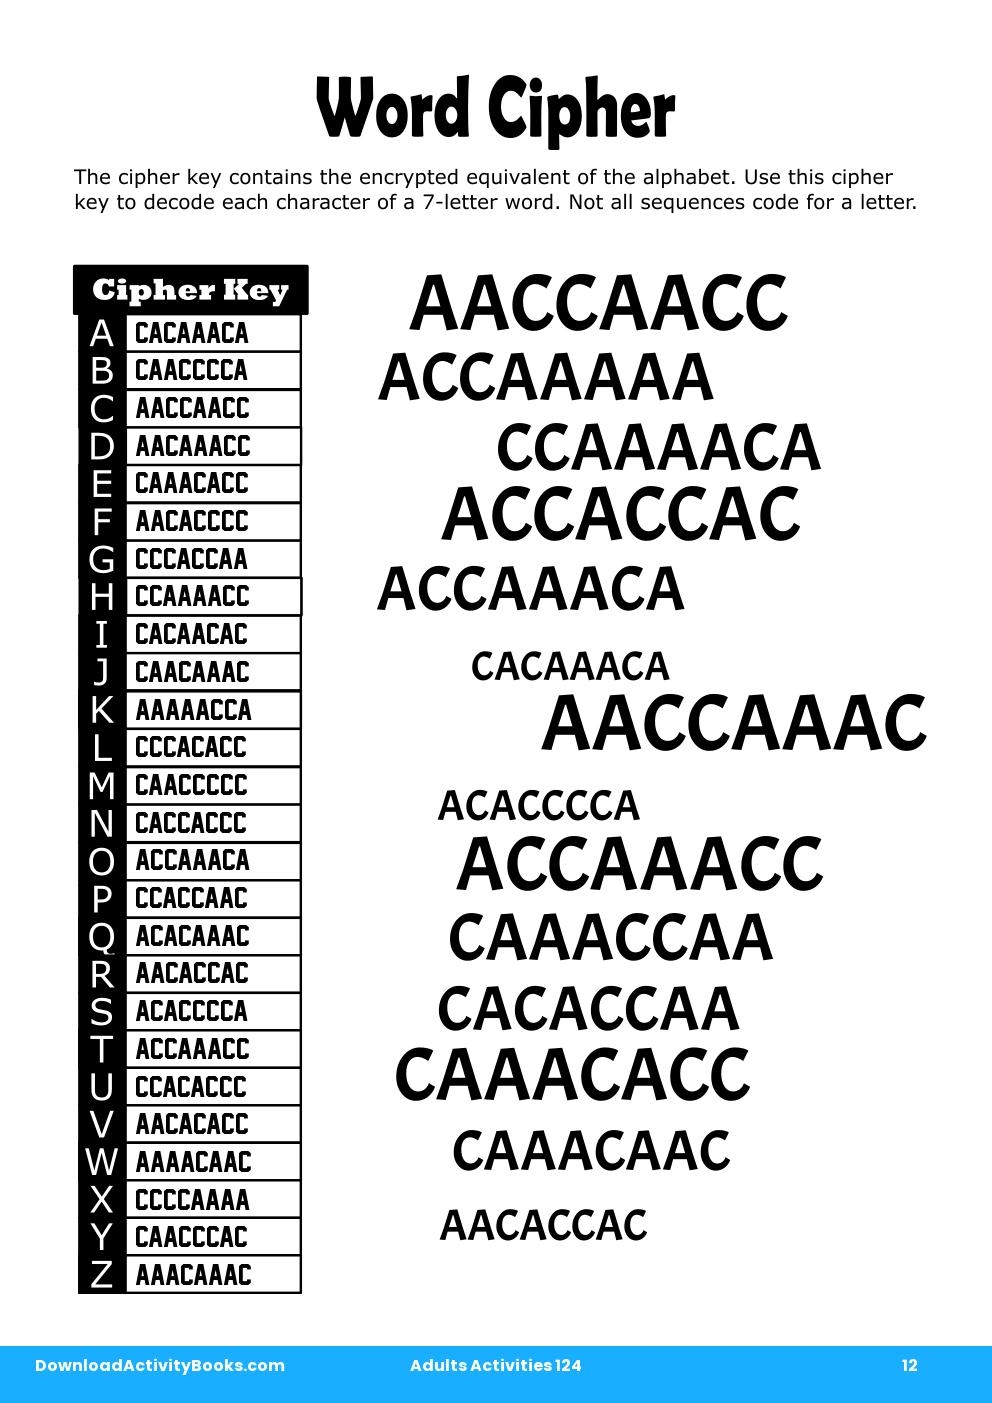 Word Cipher in Adults Activities 124